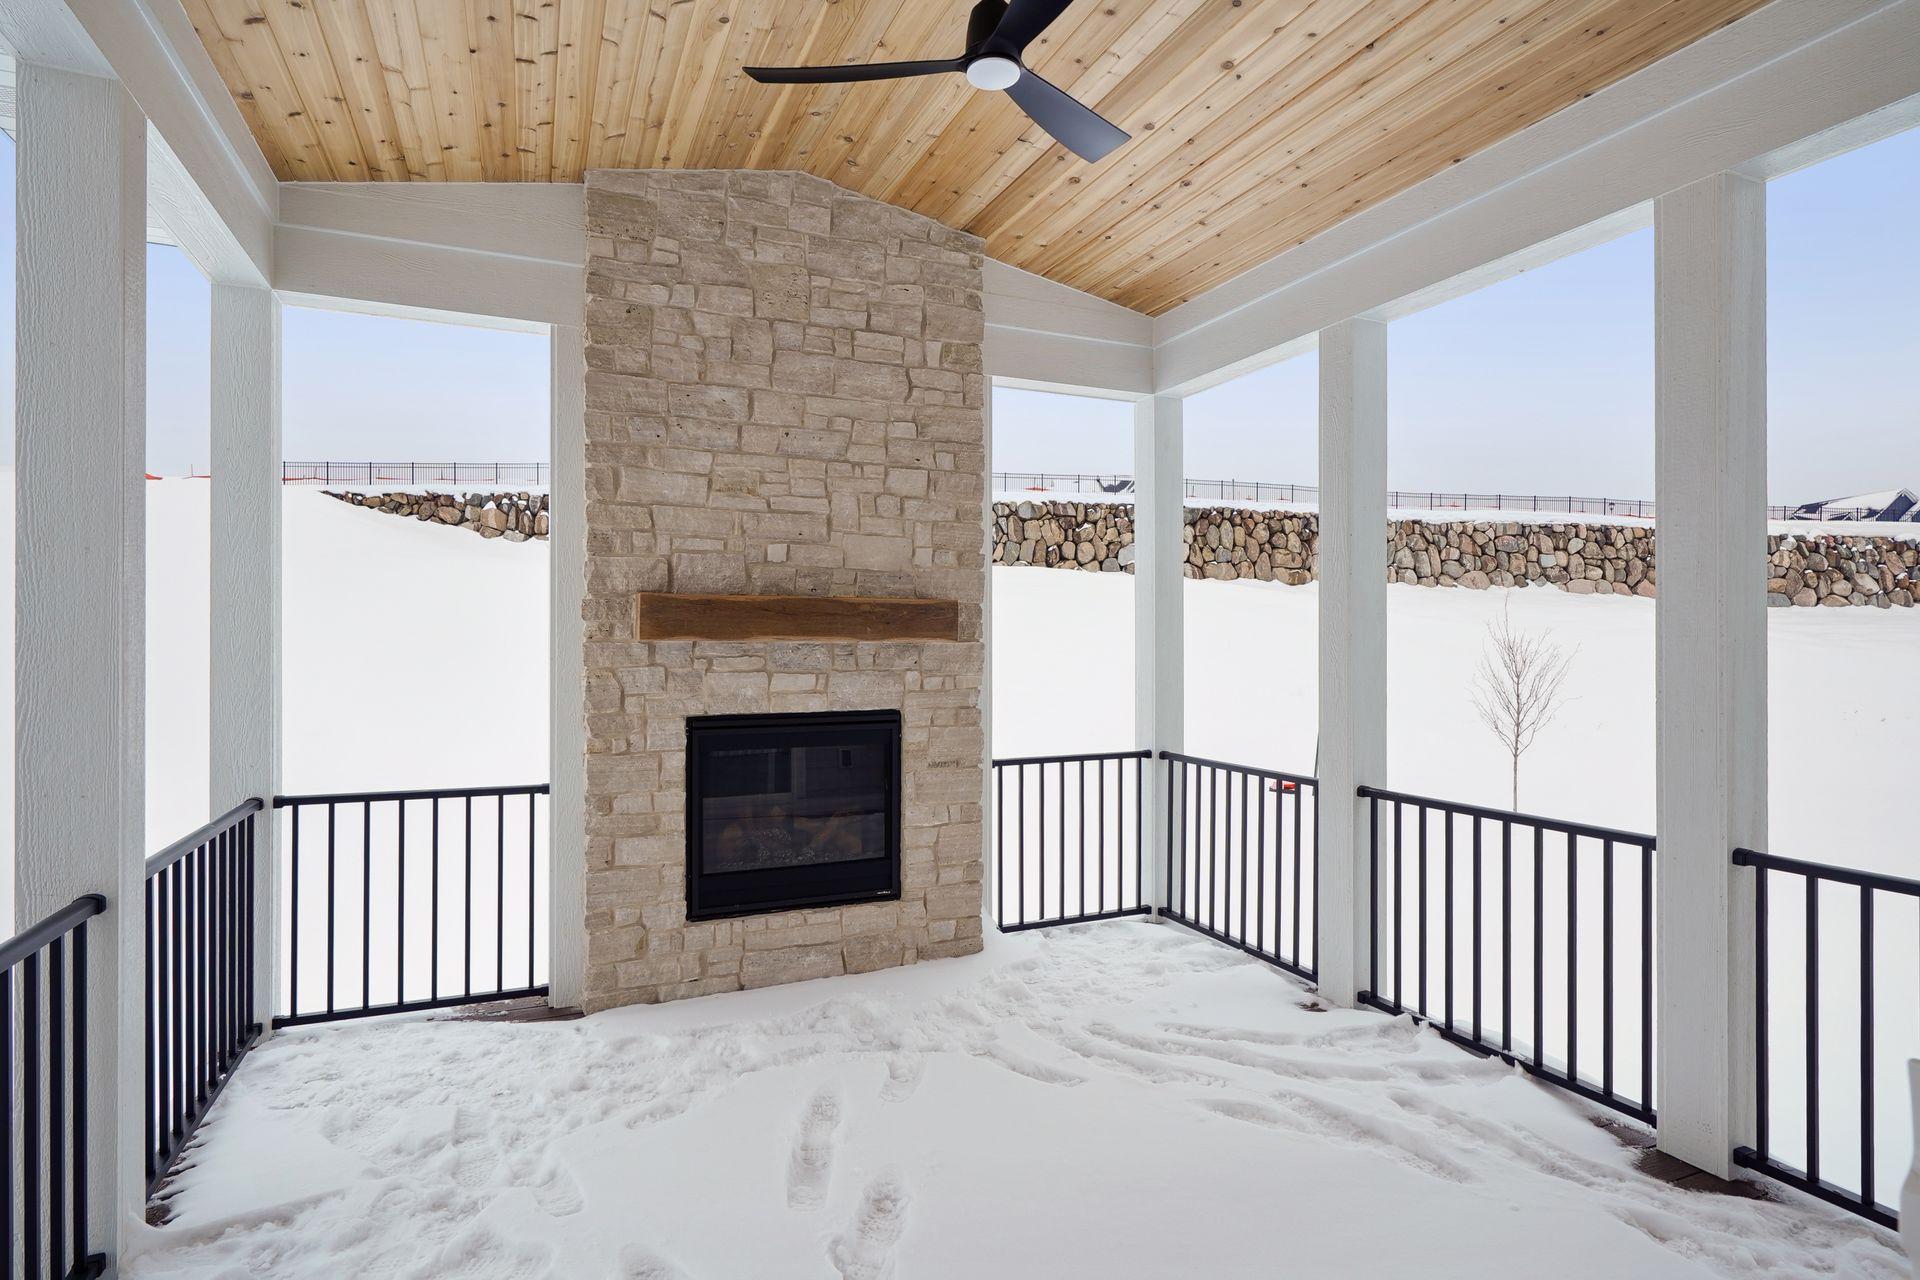 3-season, composite decking, stacked stone fireplace to ceiling, Sunspace windows still coming